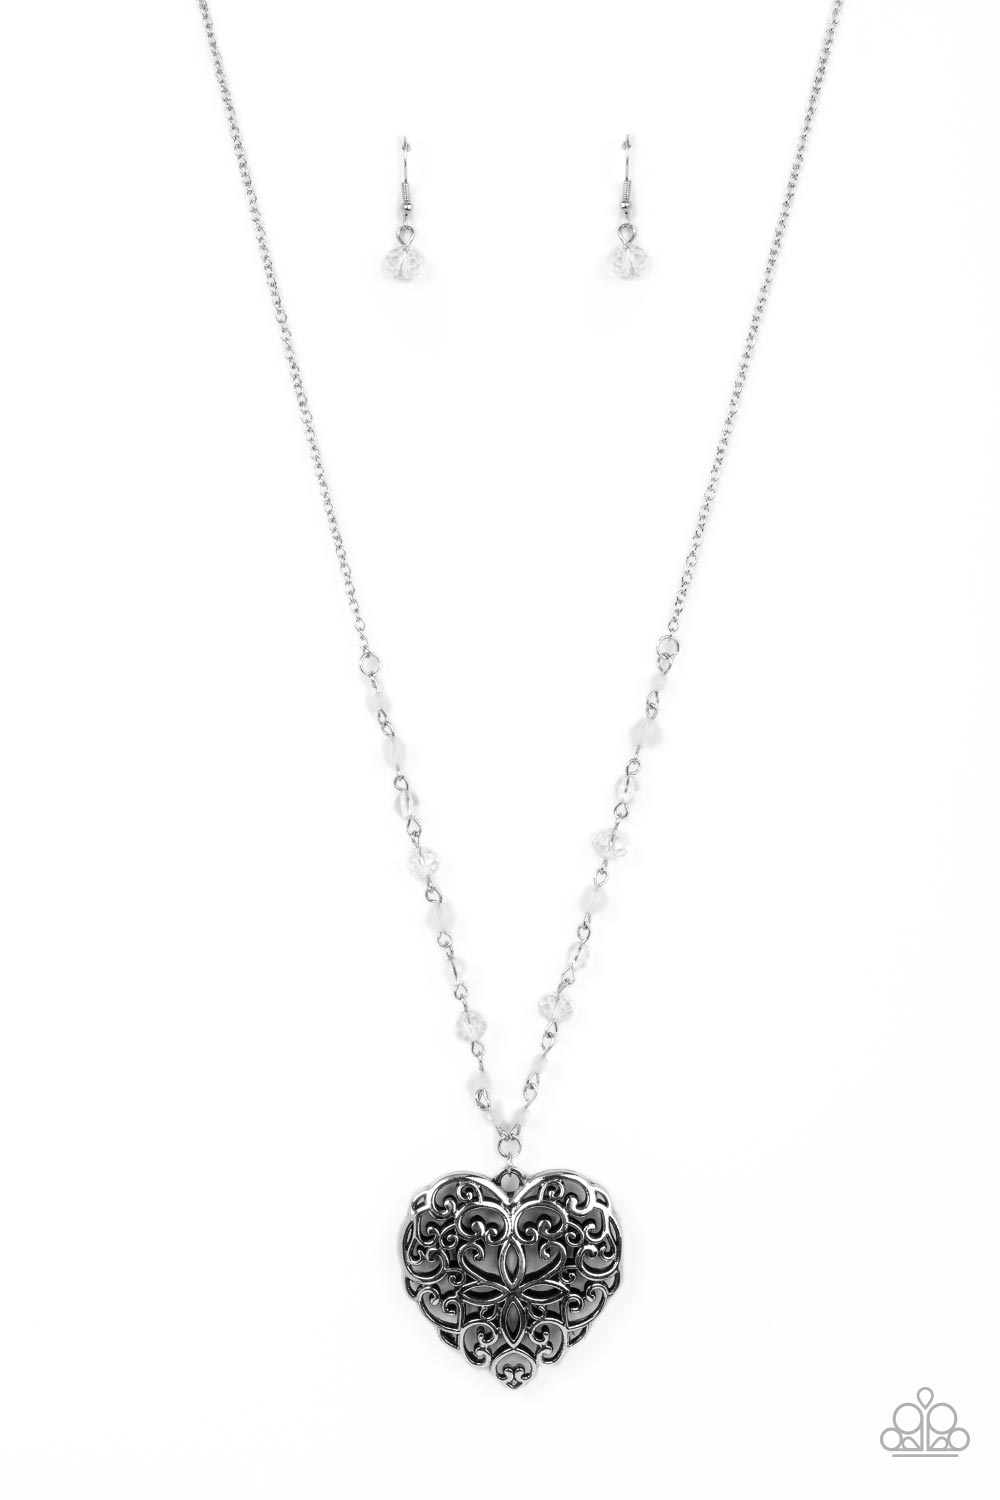 Doting Devotion - White beads/Silver heart necklace